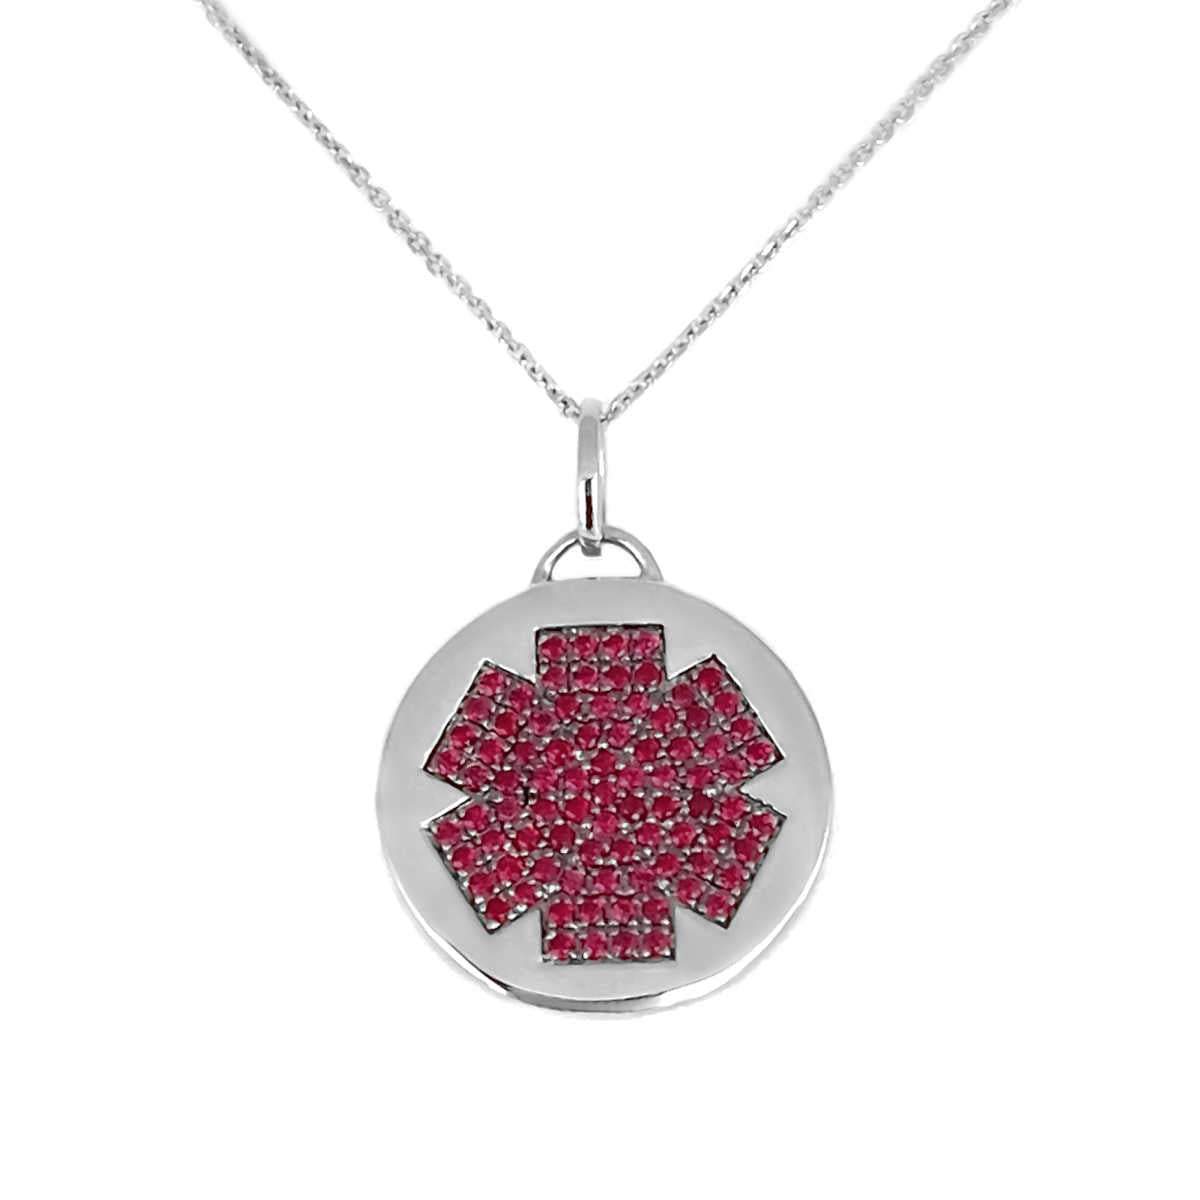 White Gold & Ruby Medical Alert Necklace | Engraved ID Pendant from CHARMED Medical Jewelry